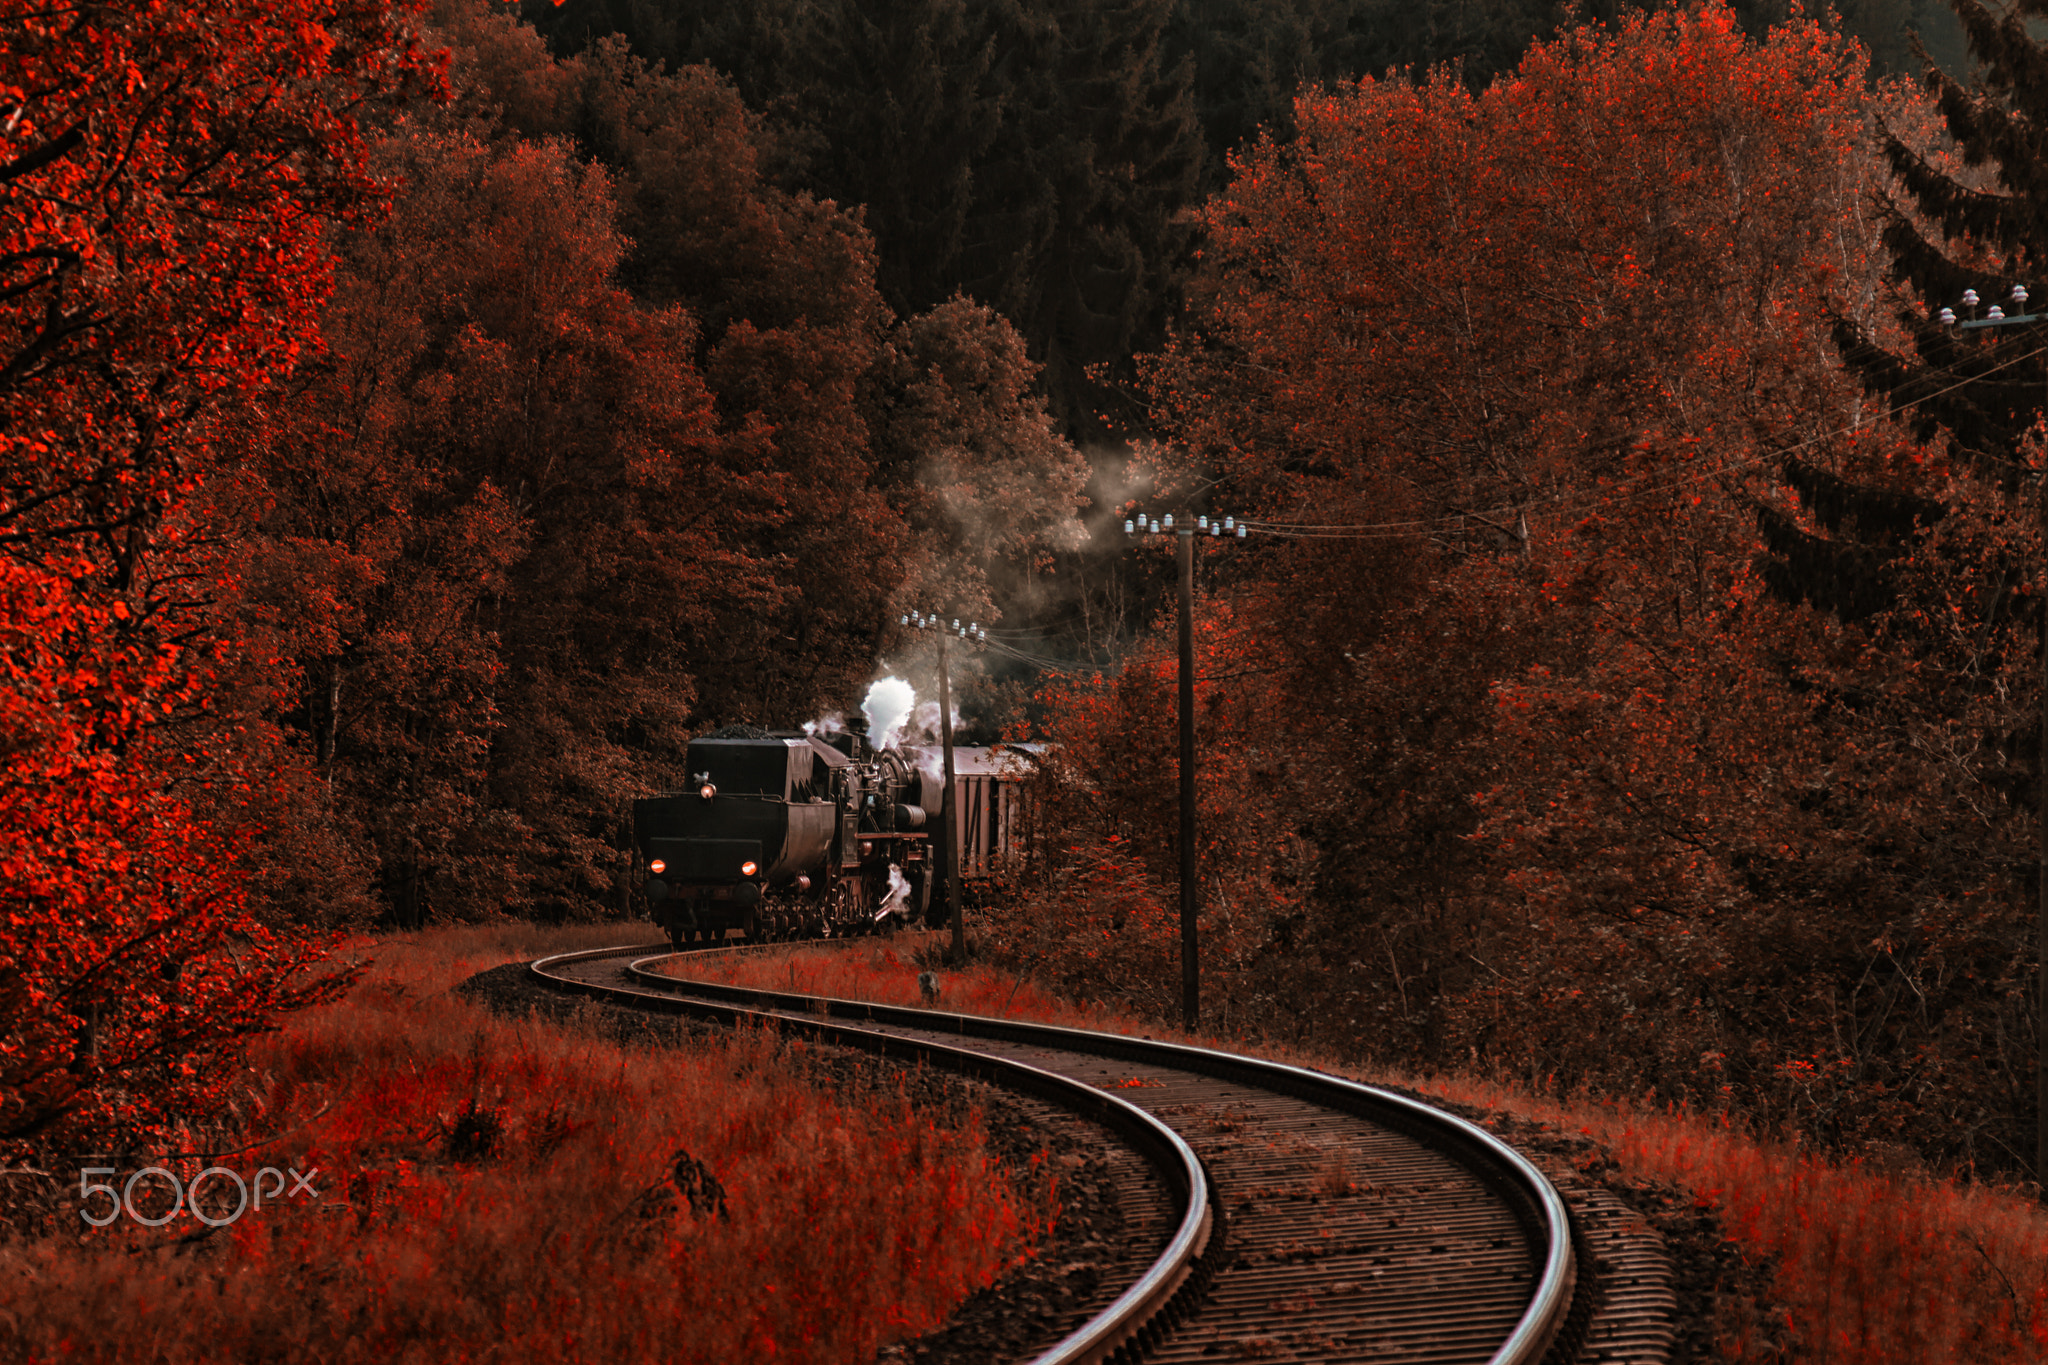 General 2048x1365 red nature landscape 500px Niko Angelopoulos railway train trees vehicle